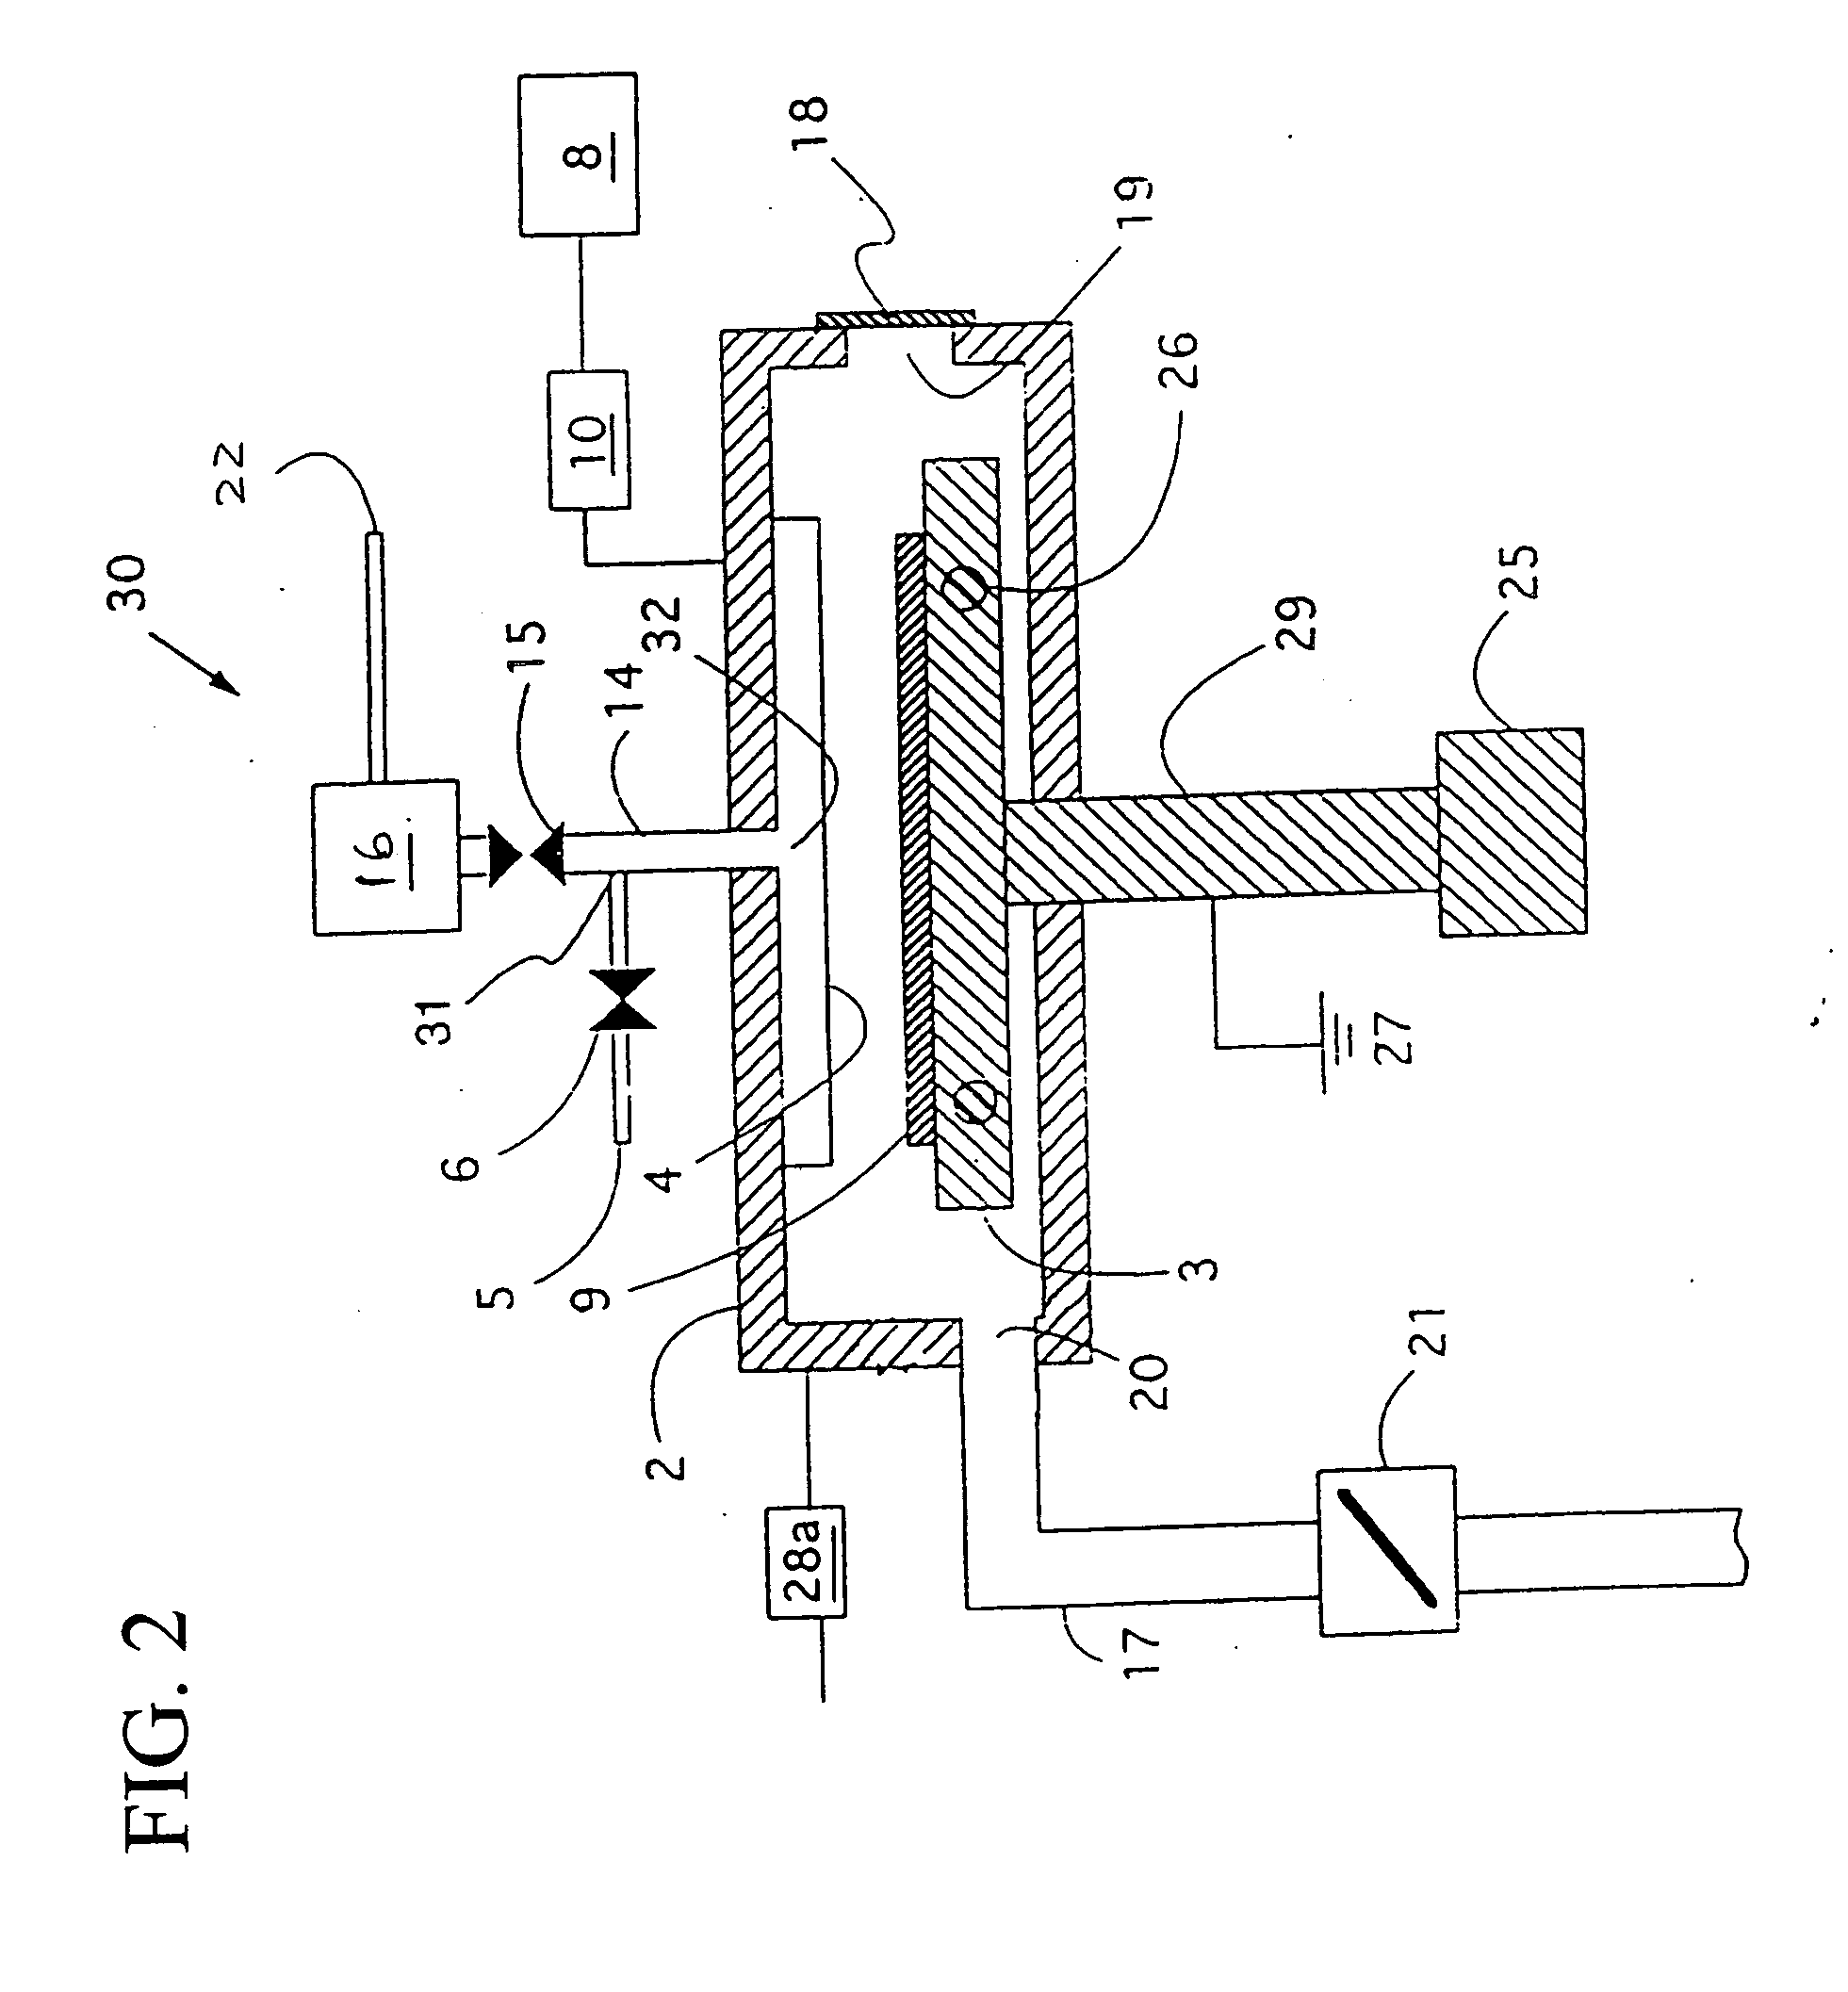 Thin-film forming apparatus having an automatic cleaning function for cleaning the inside